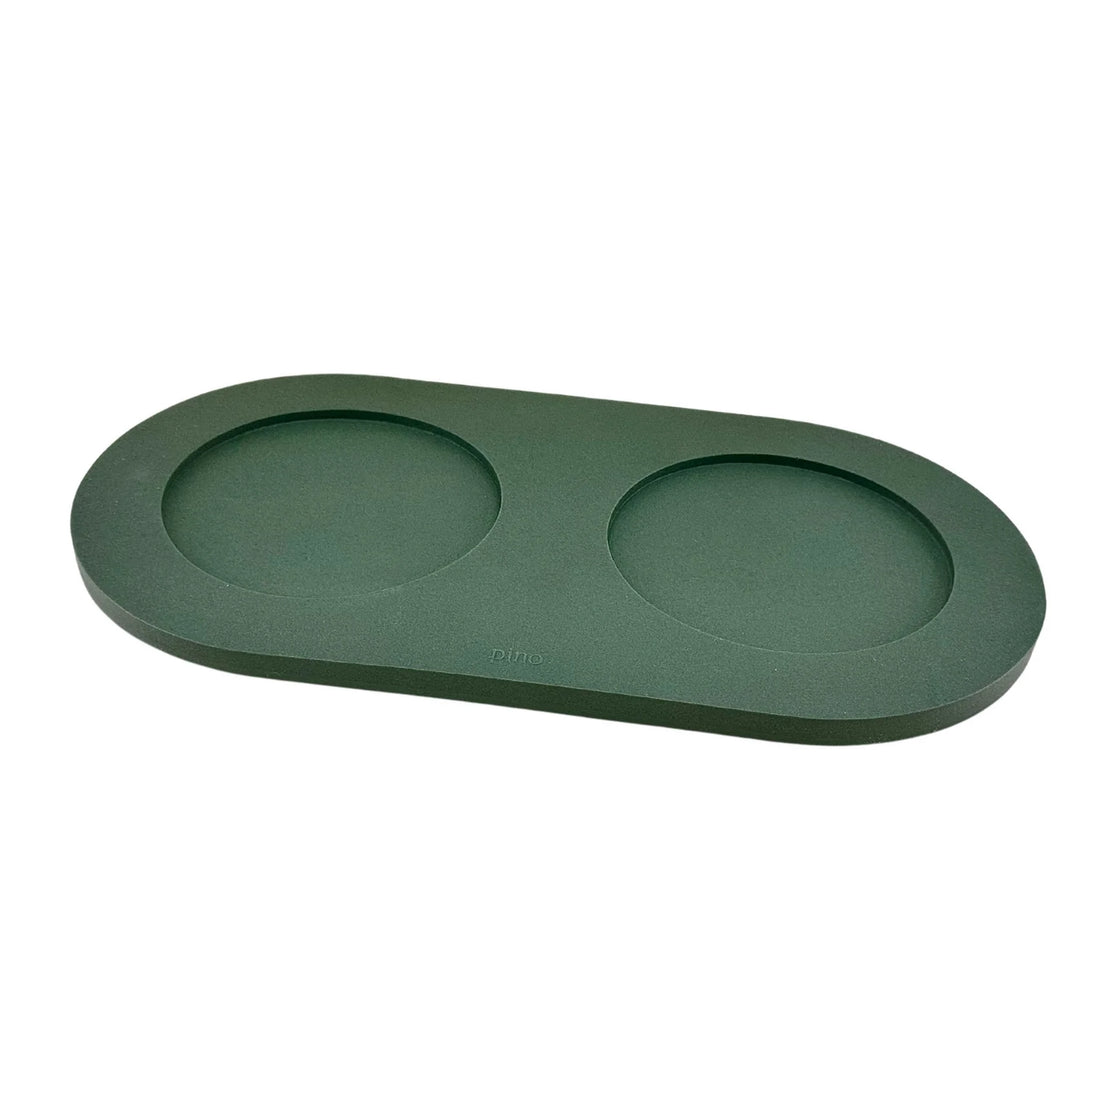 Serving Tray - Duck Green